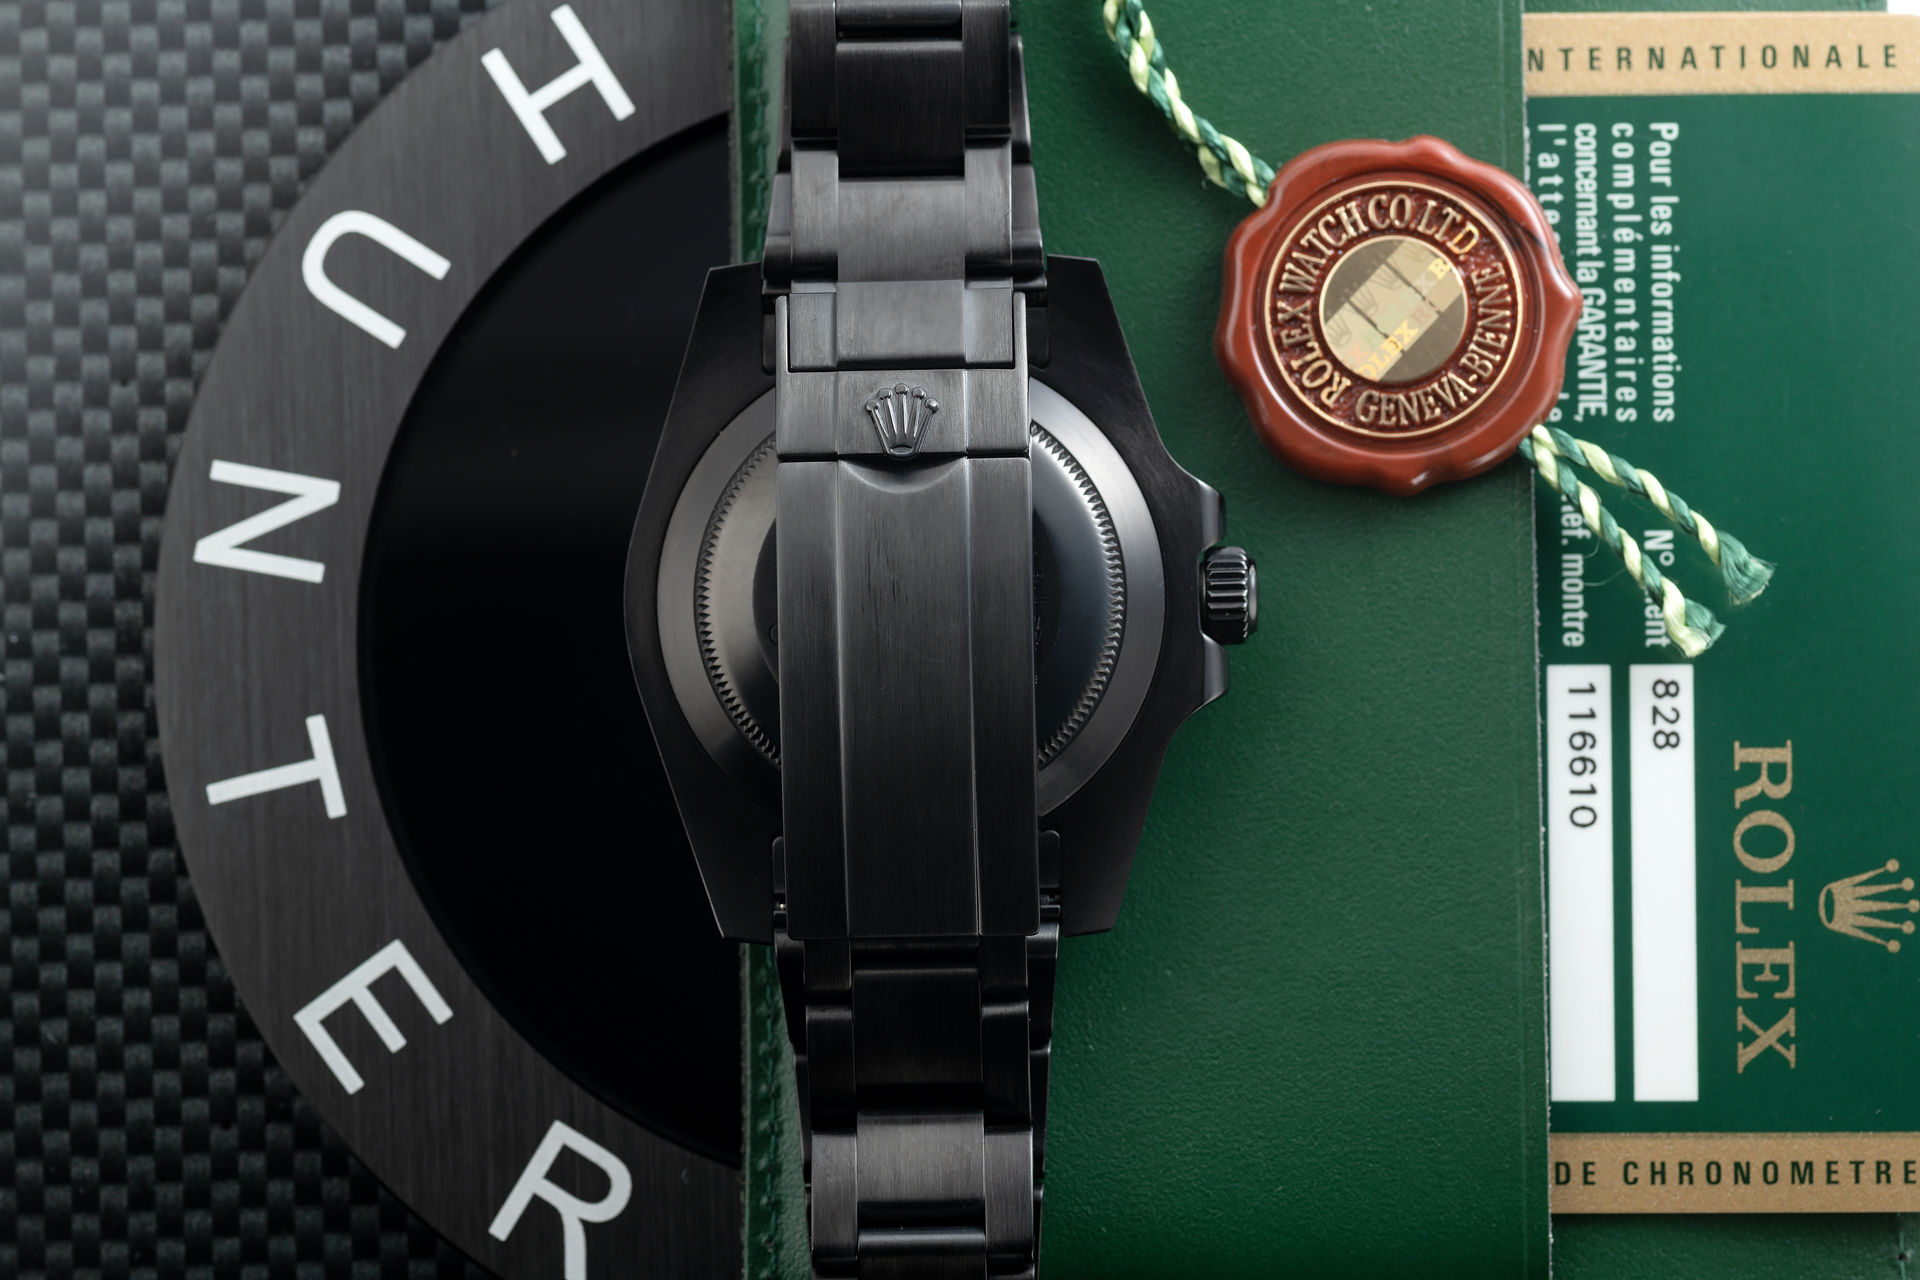 ref 116610LN | Limited Series '1 of 100' | Pro Hunter Submariner Date